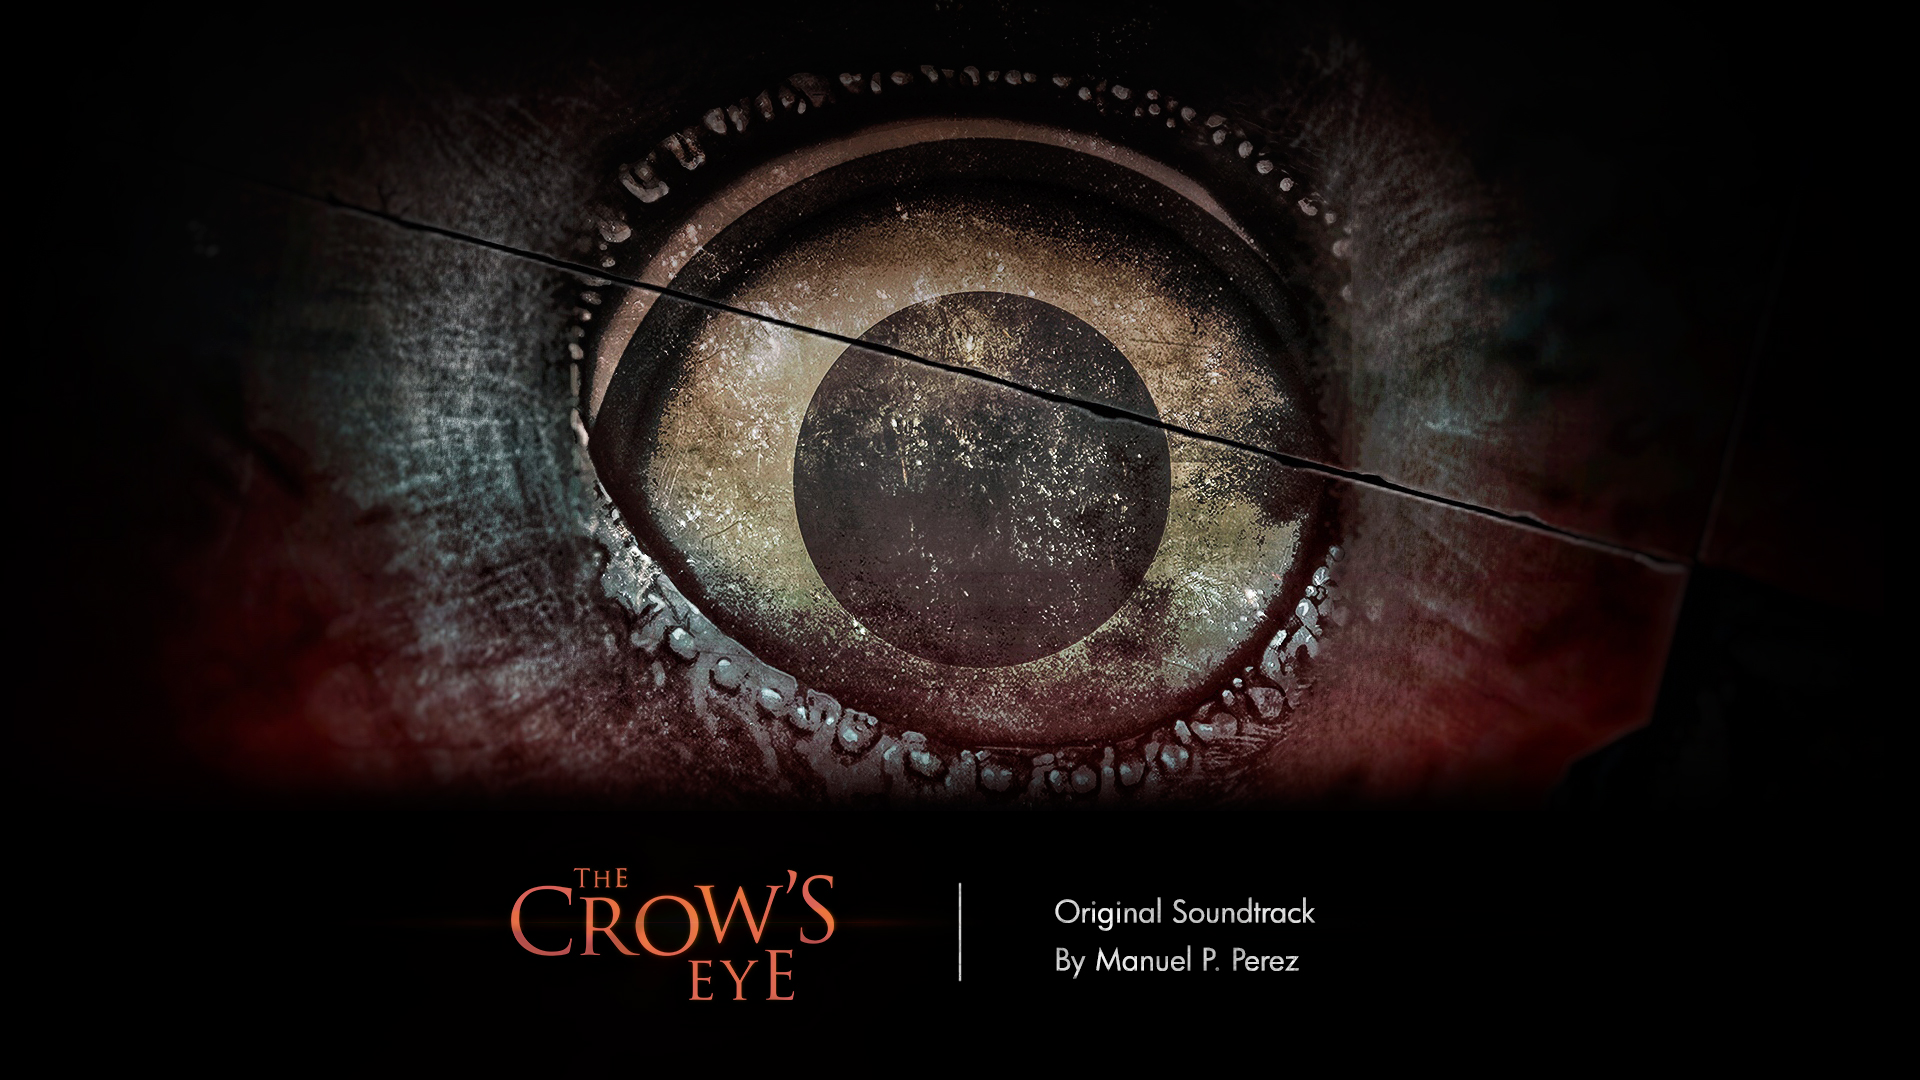 The Crow's Eye - Soundtrack Featured Screenshot #1